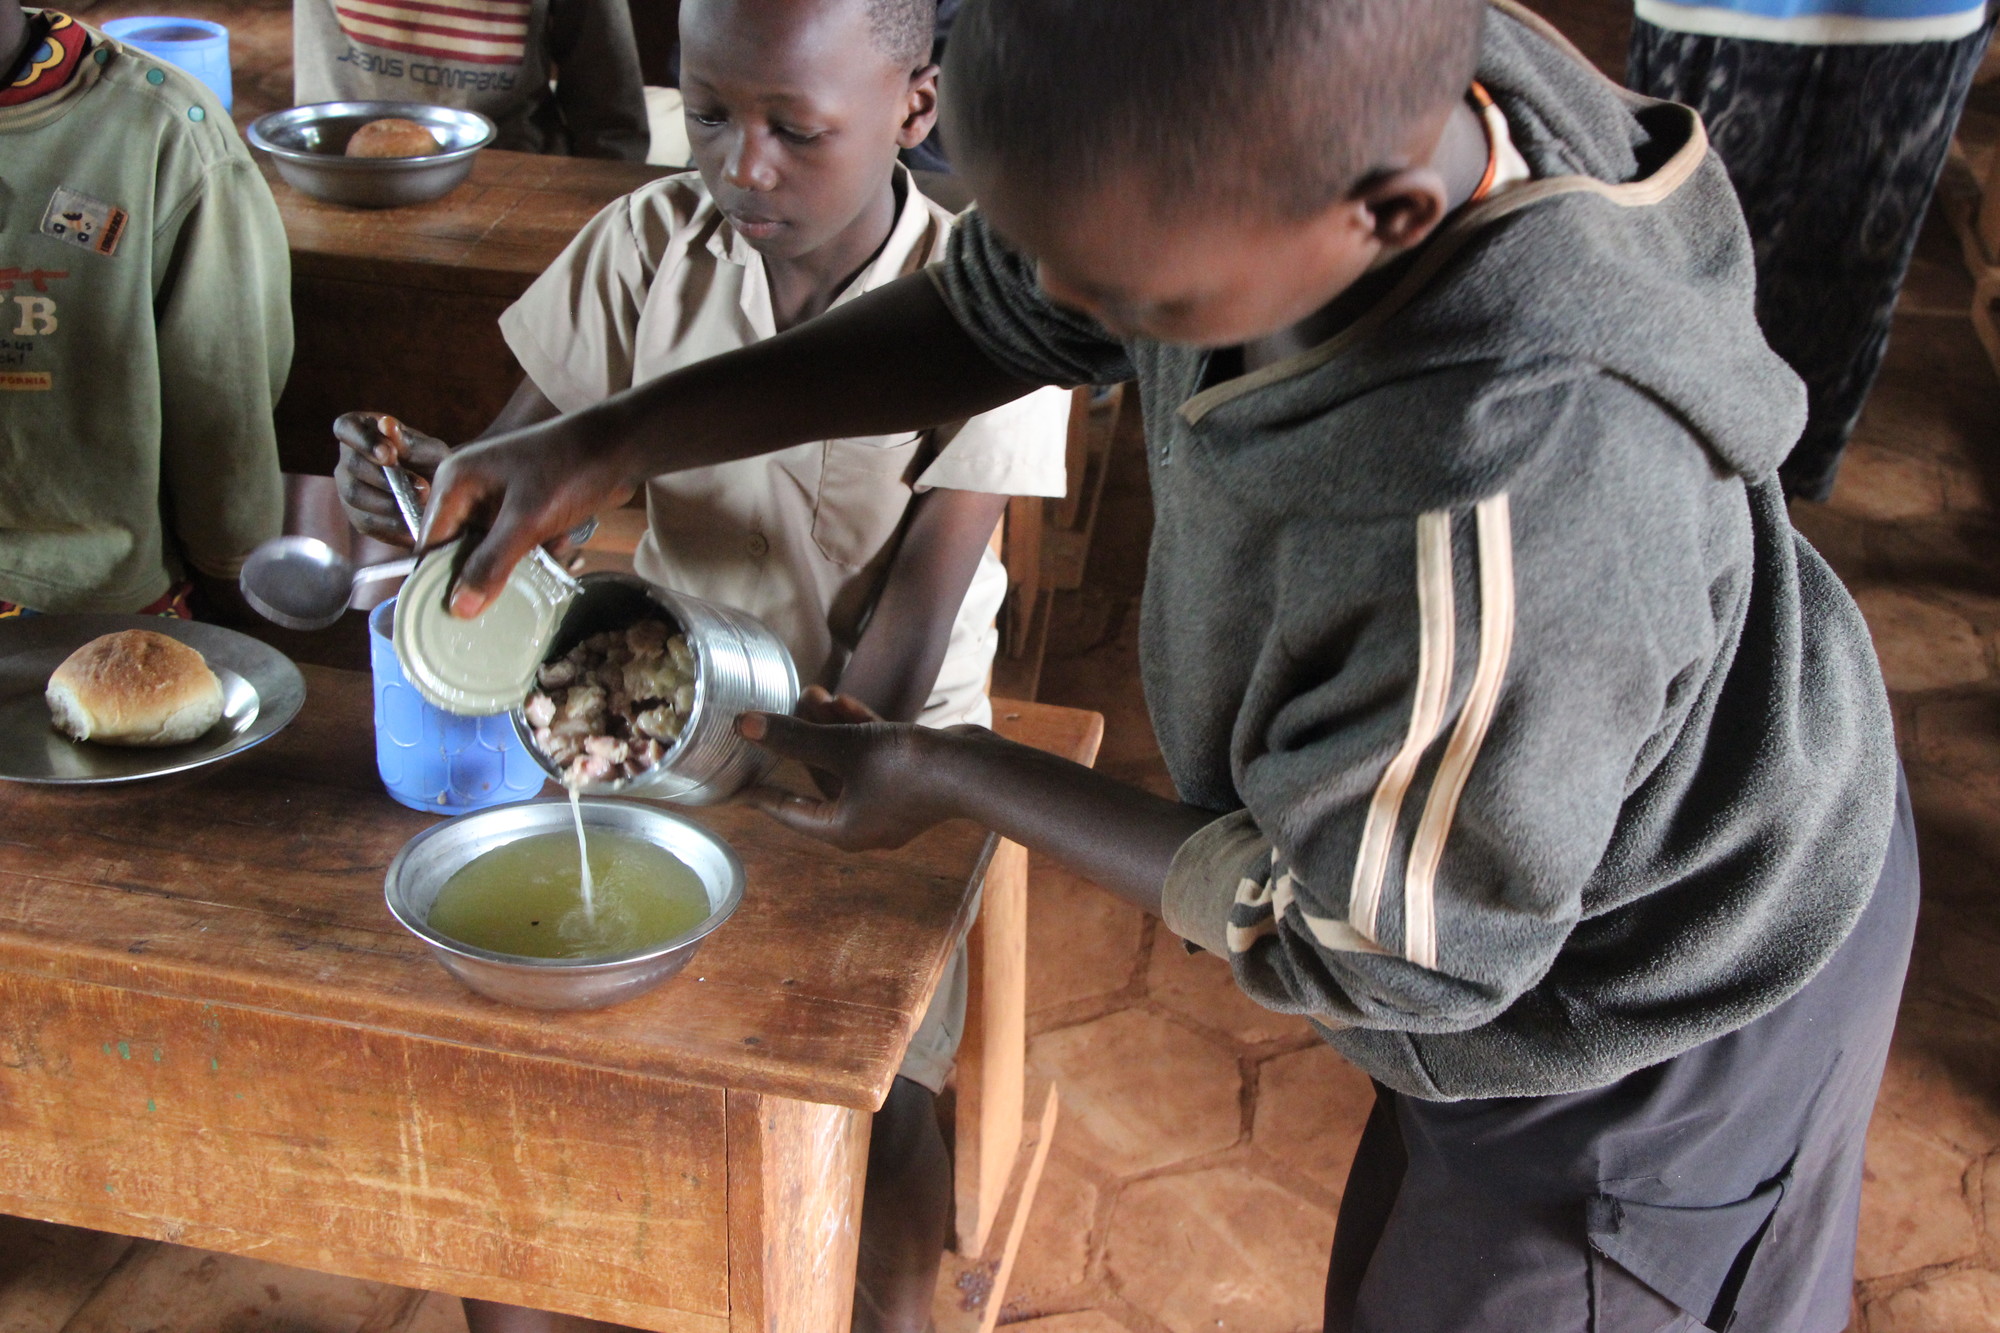 A Burundi student pours broth out of a can of meat into a bowl on a desk where other children are eating